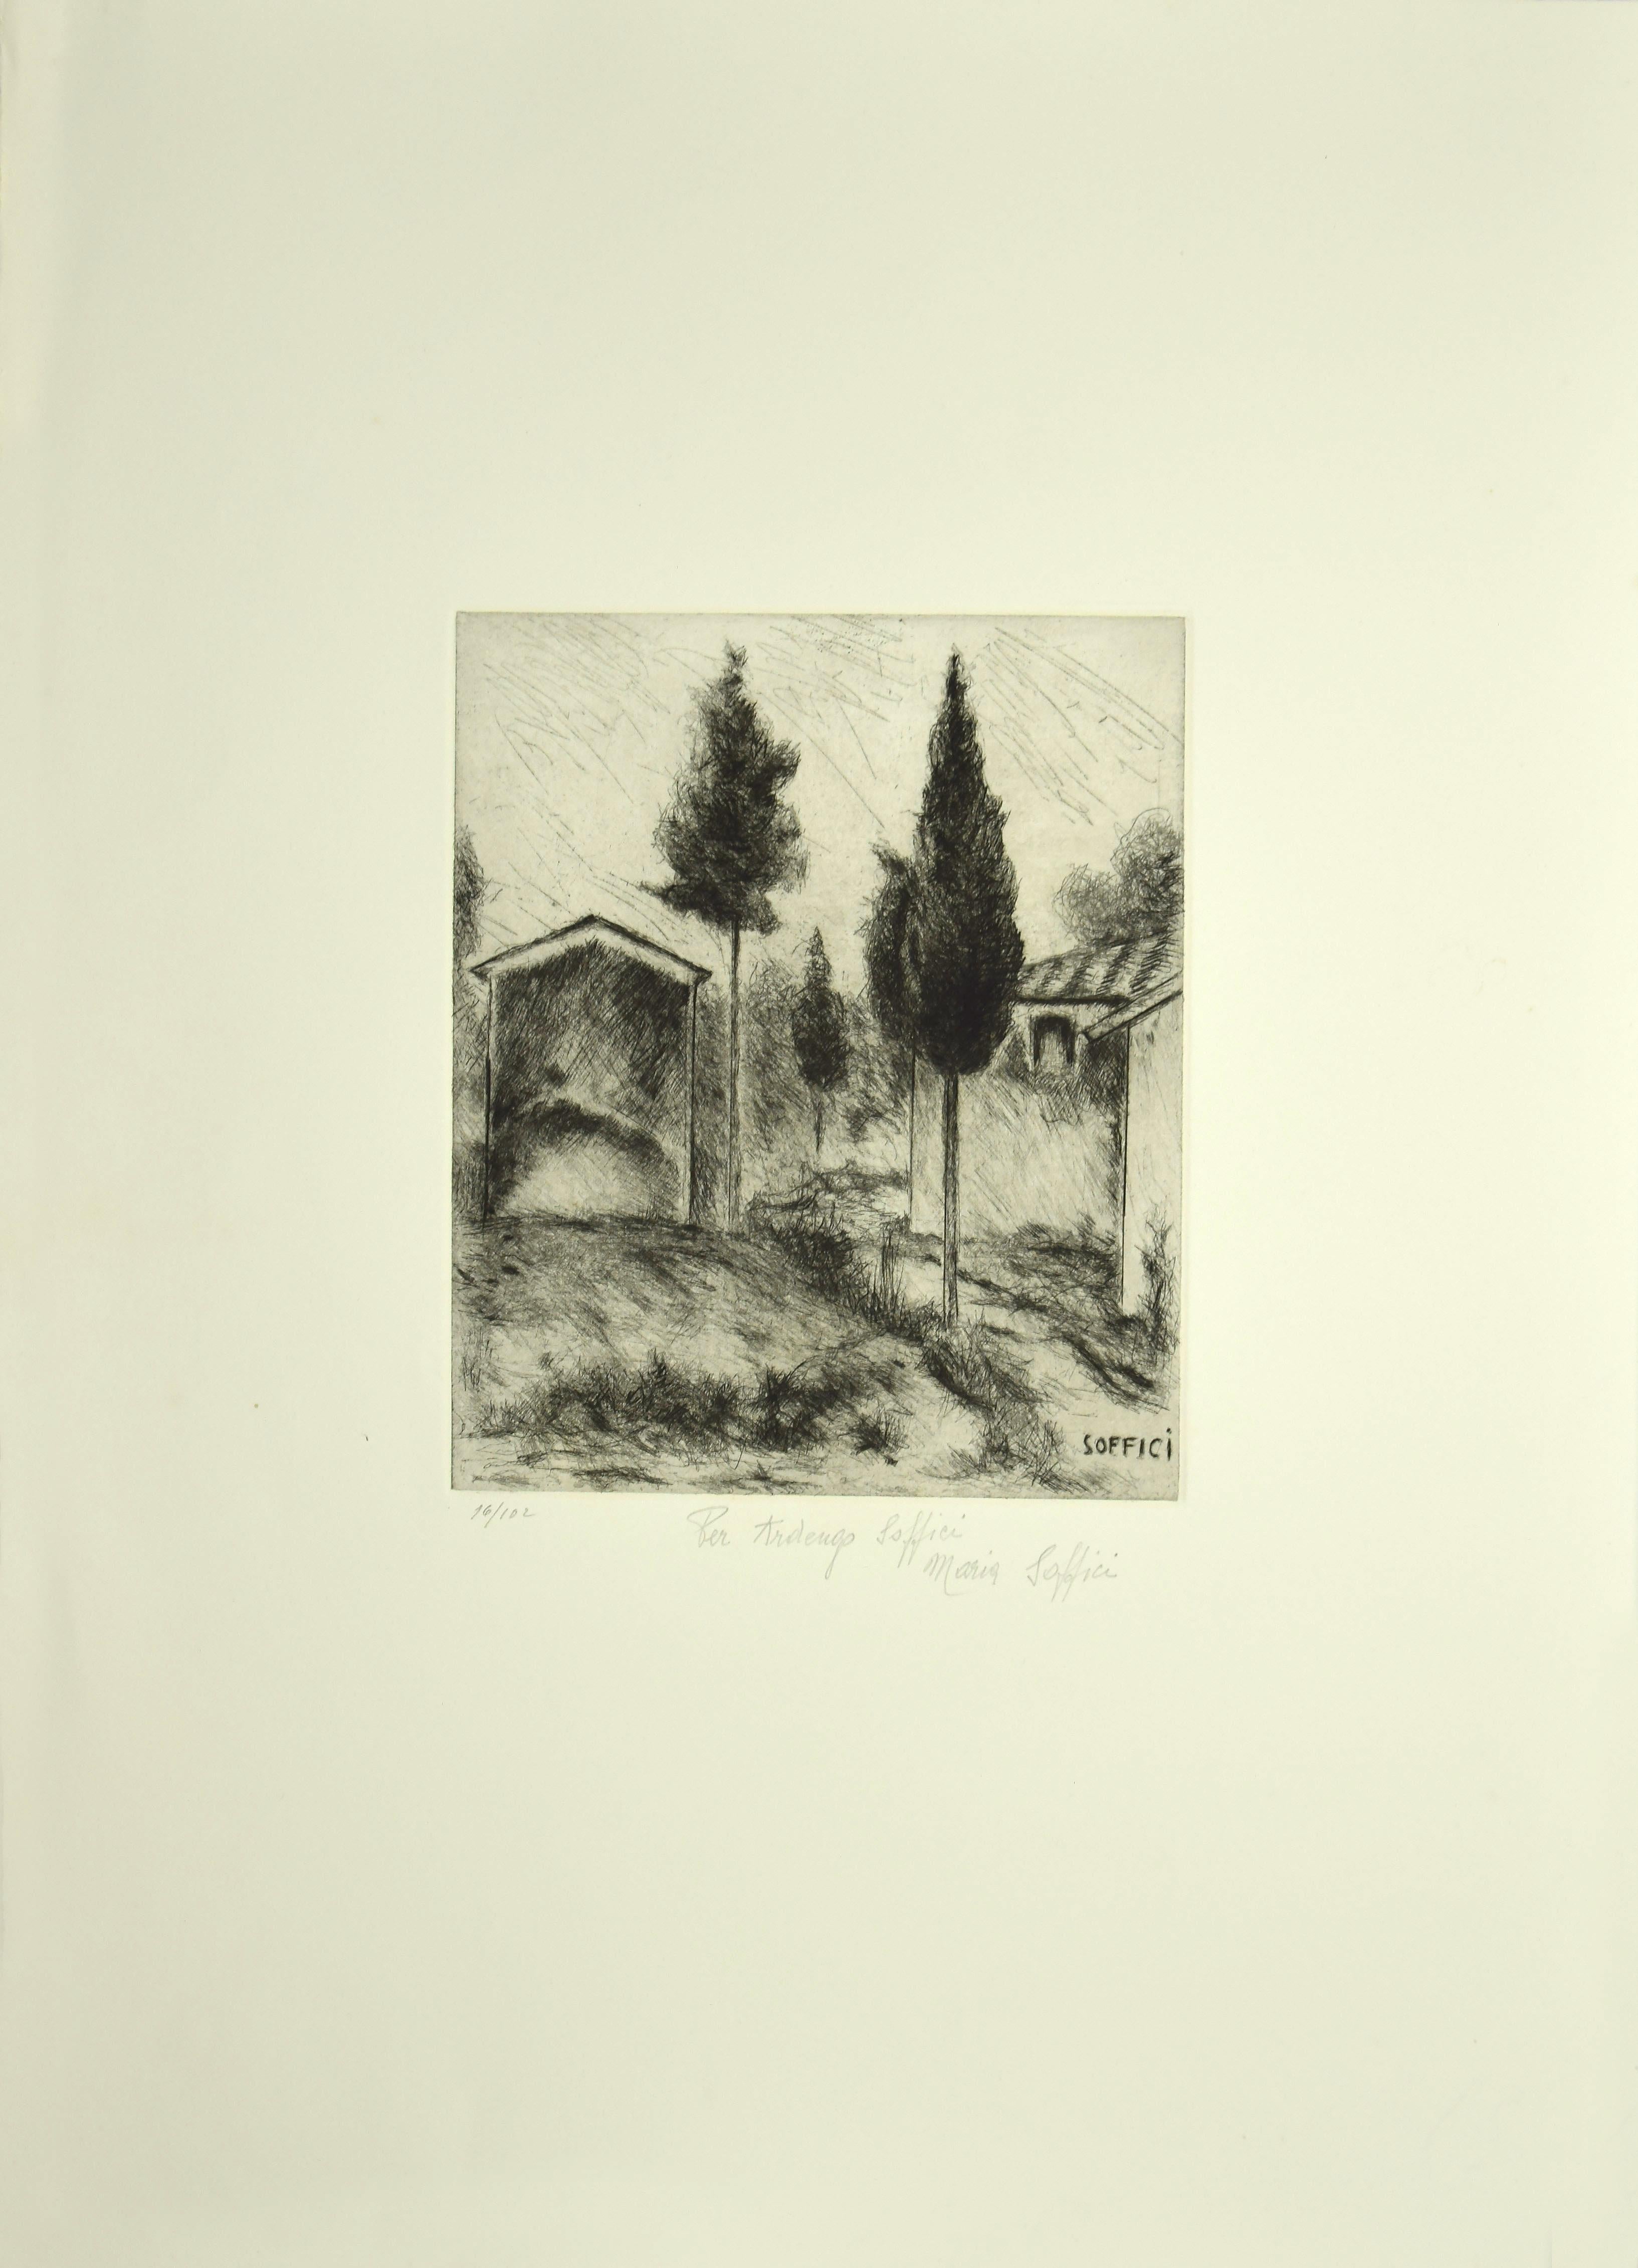 Poggio a Caiano - Etching and Drypoint by A. Soffici - 1964 - Print by Ardengo Soffici